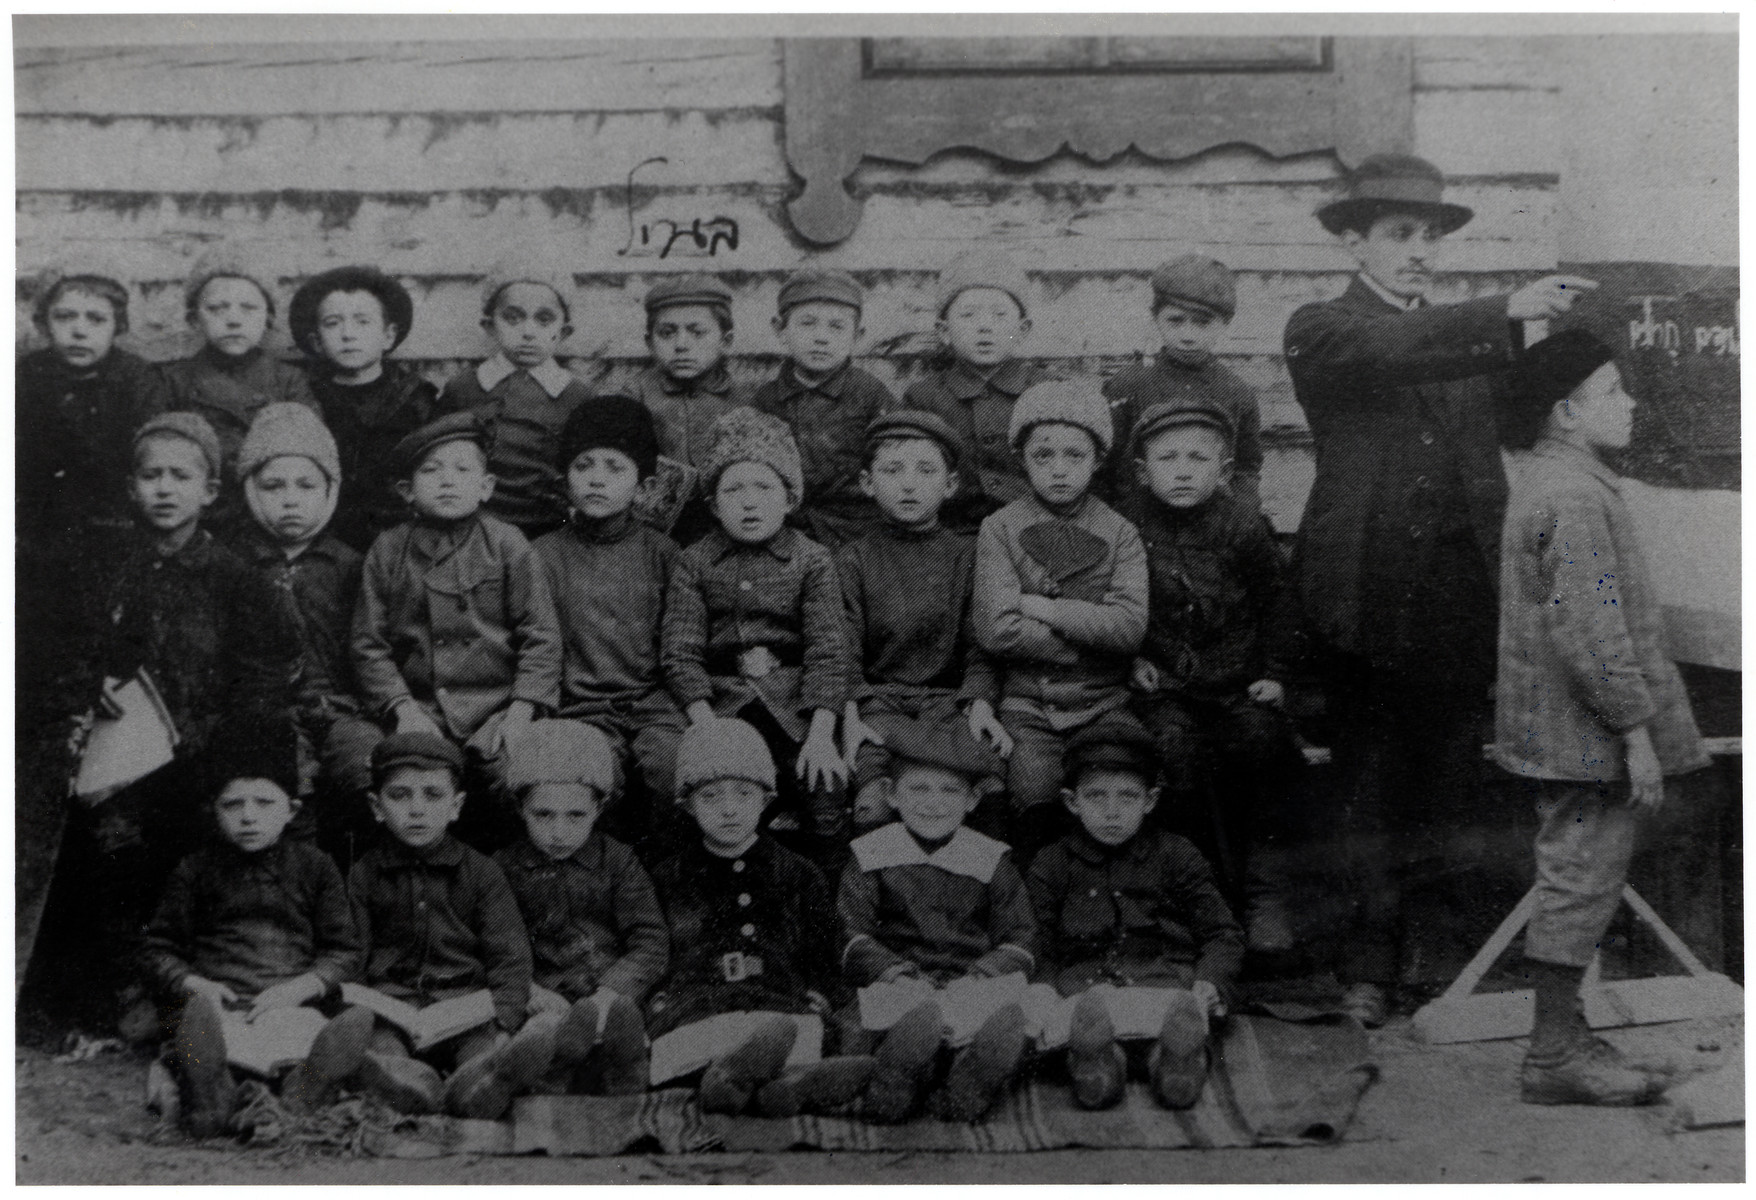 Group portrait of young boys in a cheder, Chevra Hebraisher, in Drohicyn.

Menachem Rosenbaum is frirst  on left,  The teacher is  Mr. Lehrer.